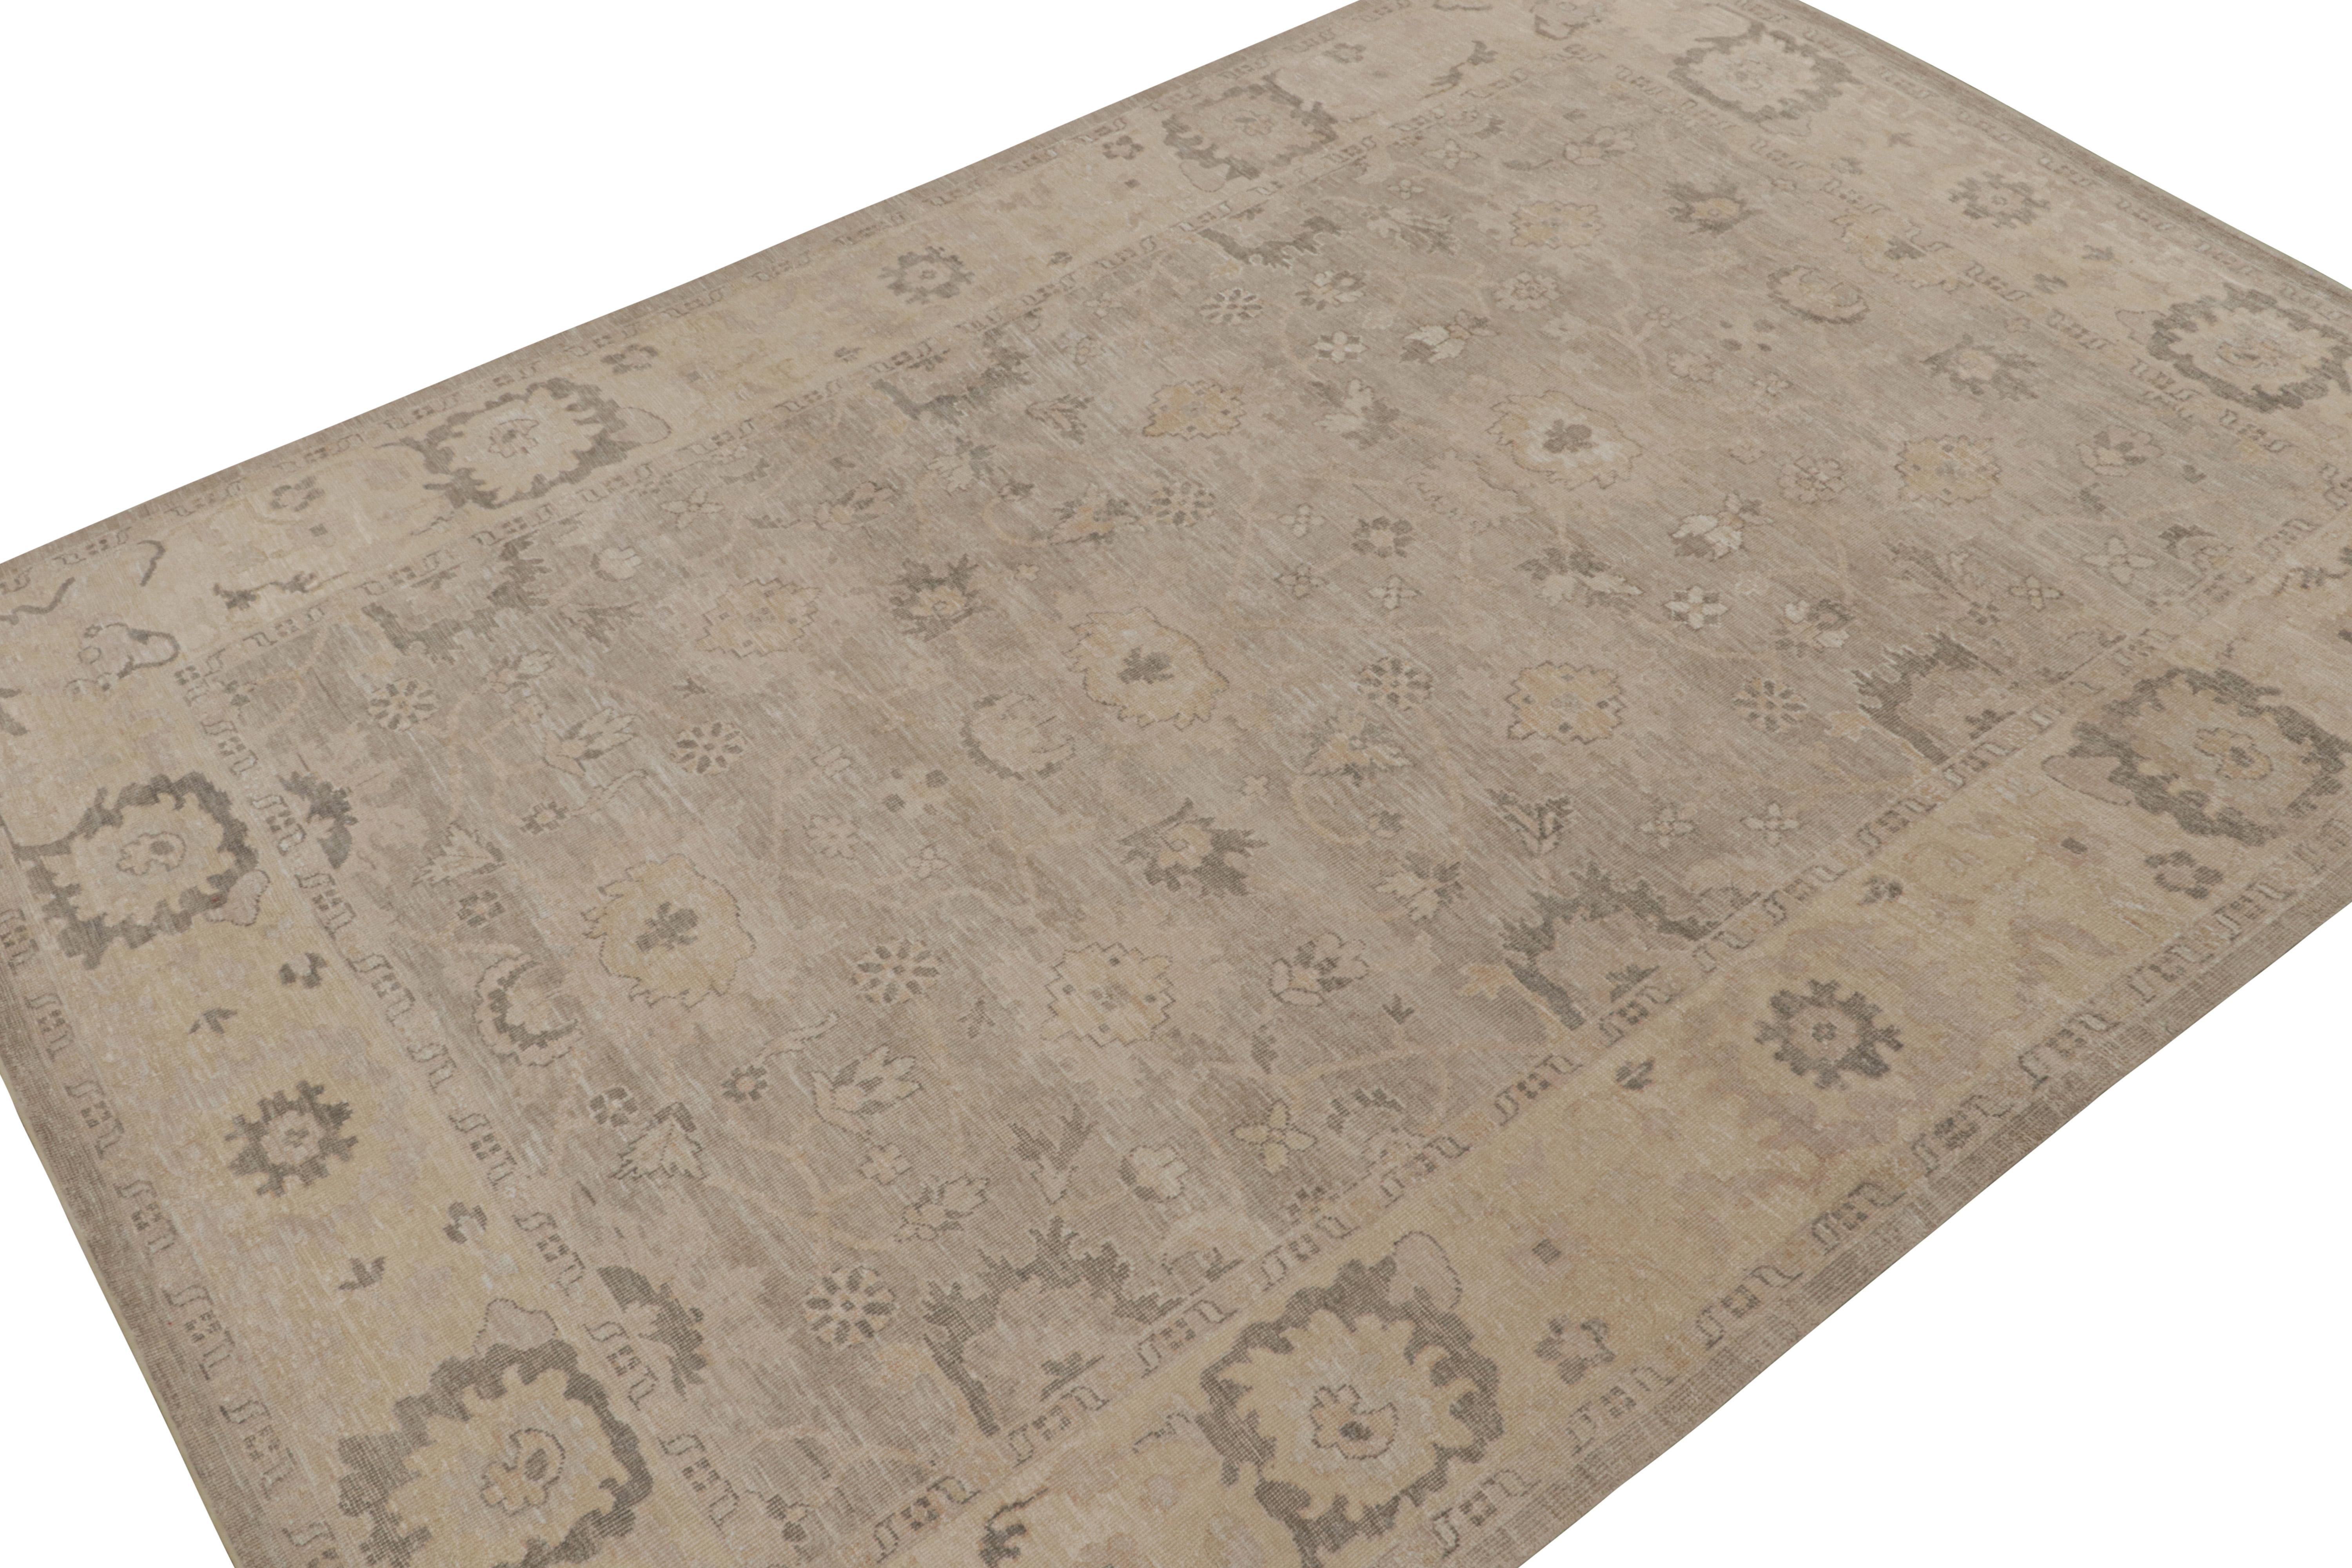 Handknotted in silk, a 10x14 piece from our new line of rugs in this collection inspired by antique Oushak rugs.

On the Design:

This piece enjoys an all over floral pattern in tones gray & beige. The design is complementary to the rustic,